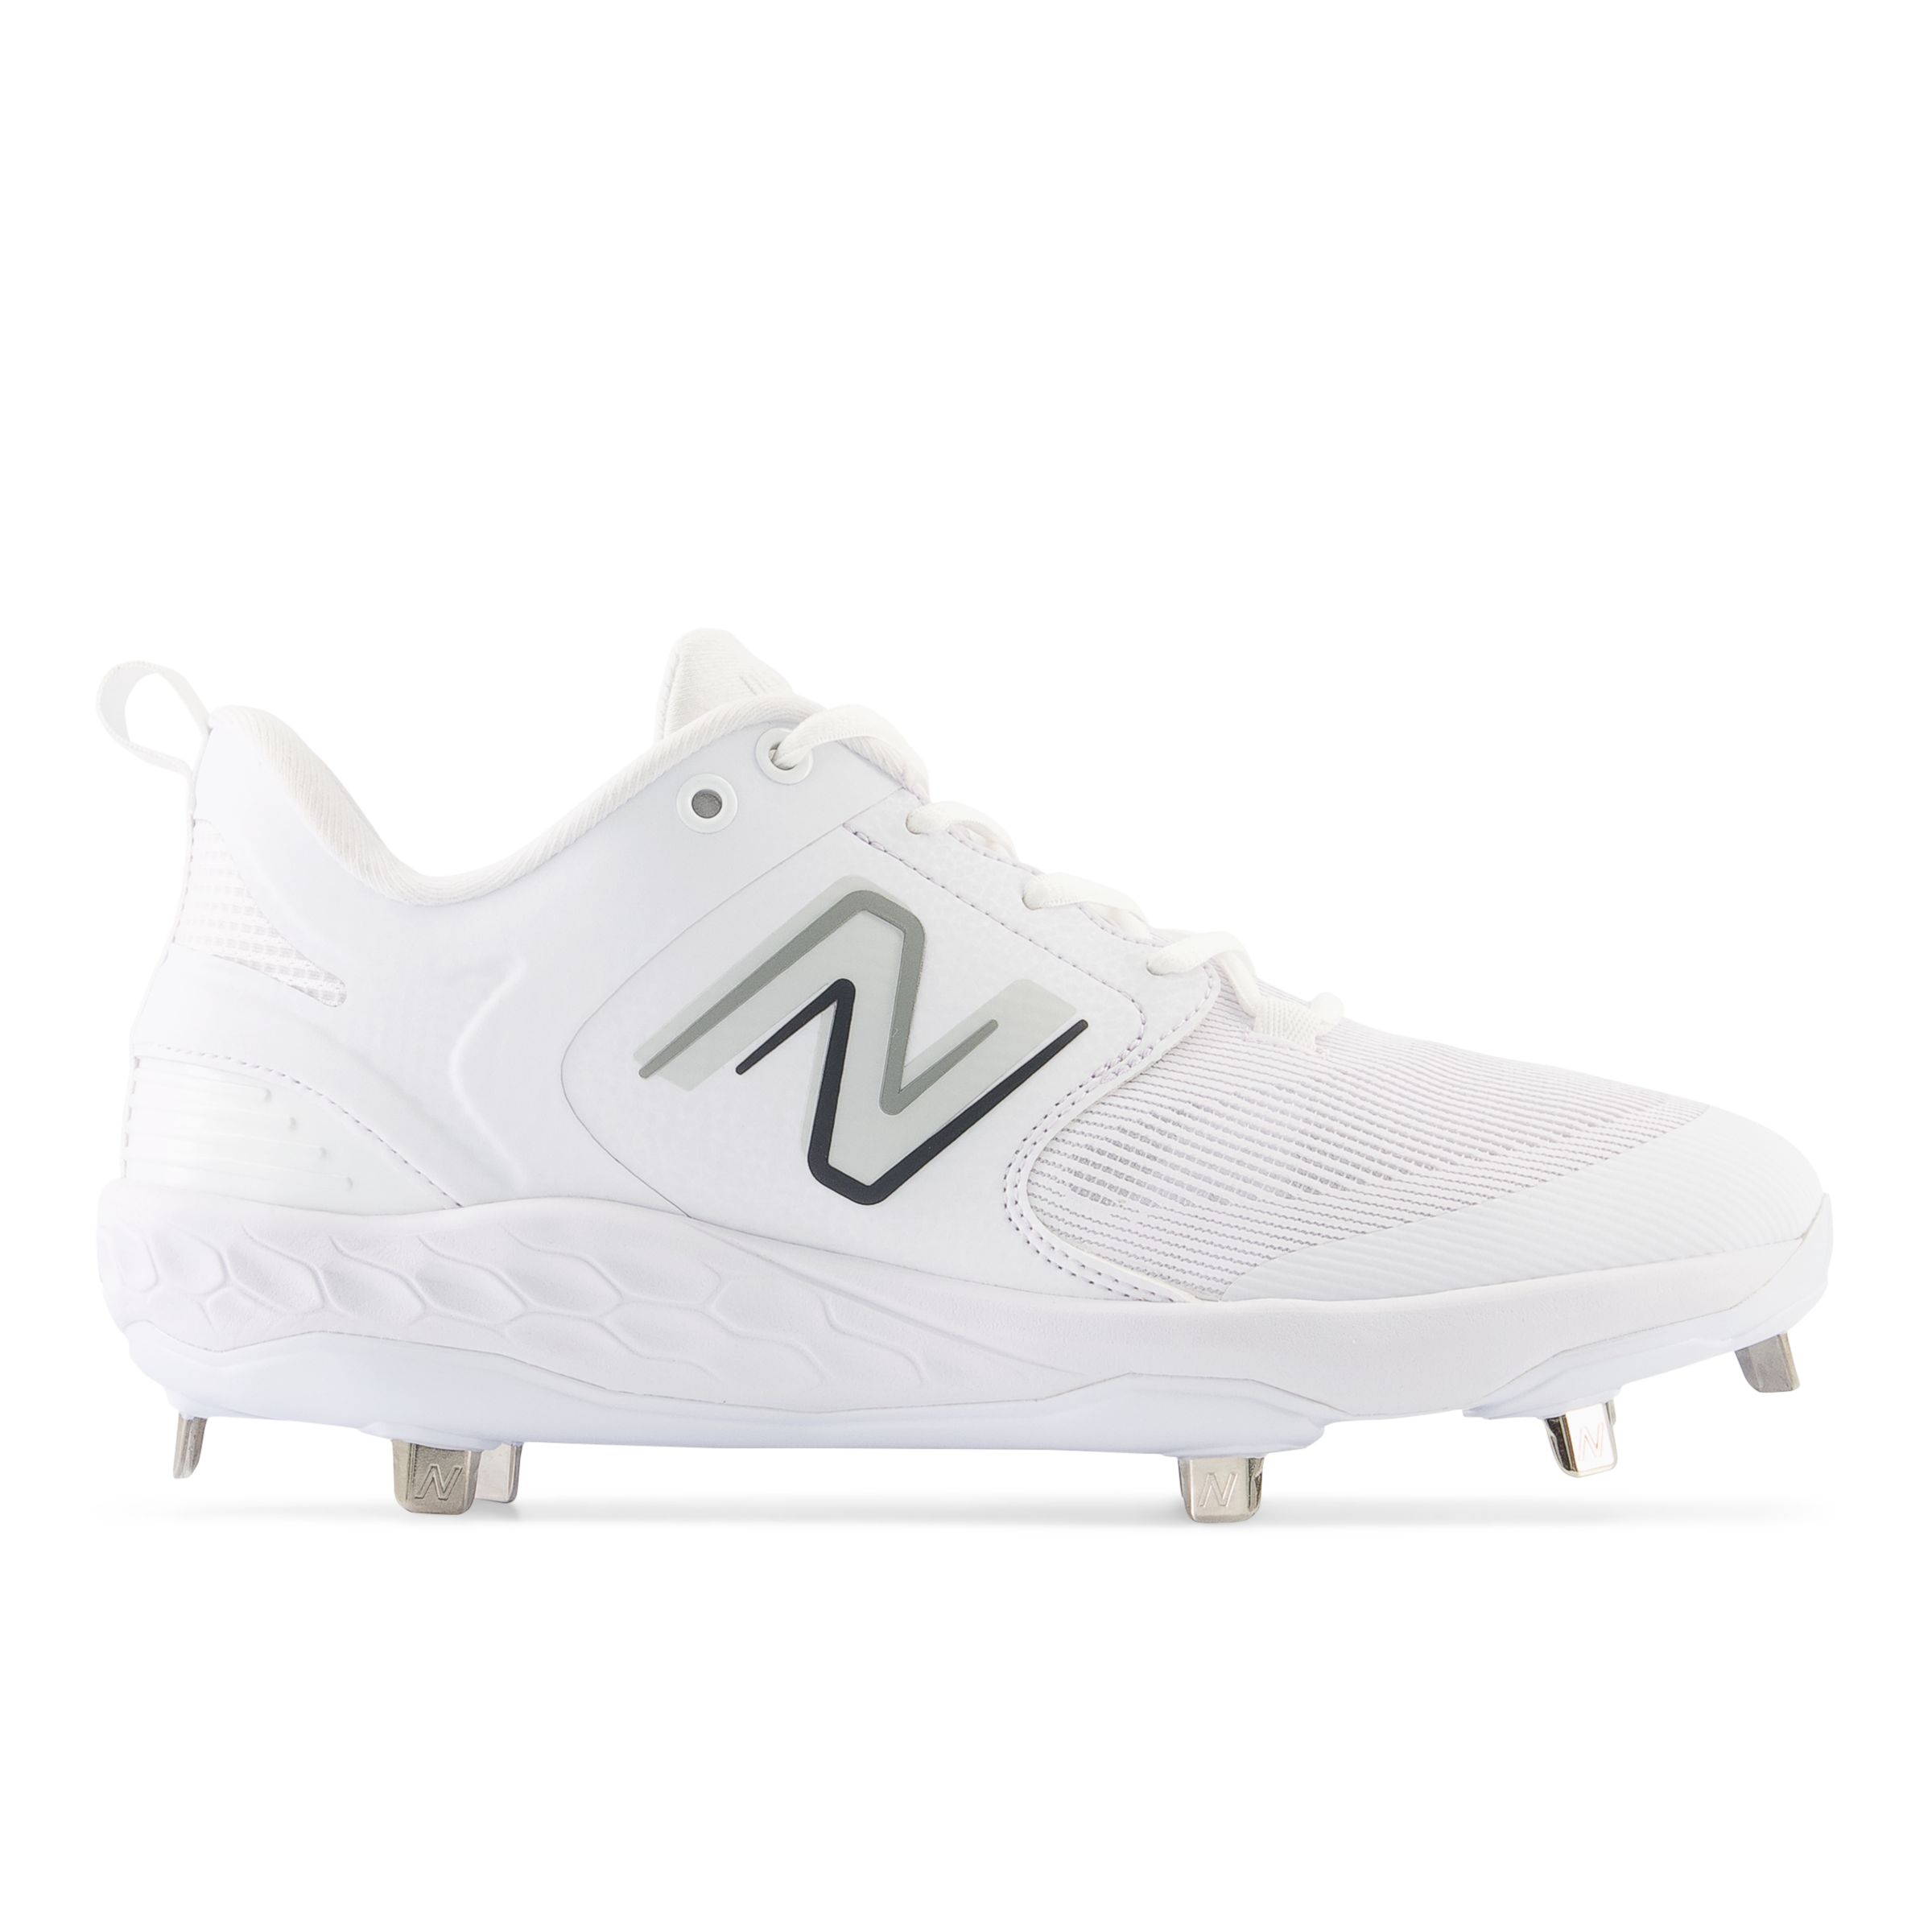 What Pros Wear: FIRST LOOK: New Balance 3000v3 Cleats (Upcoming Release) -  What Pros Wear